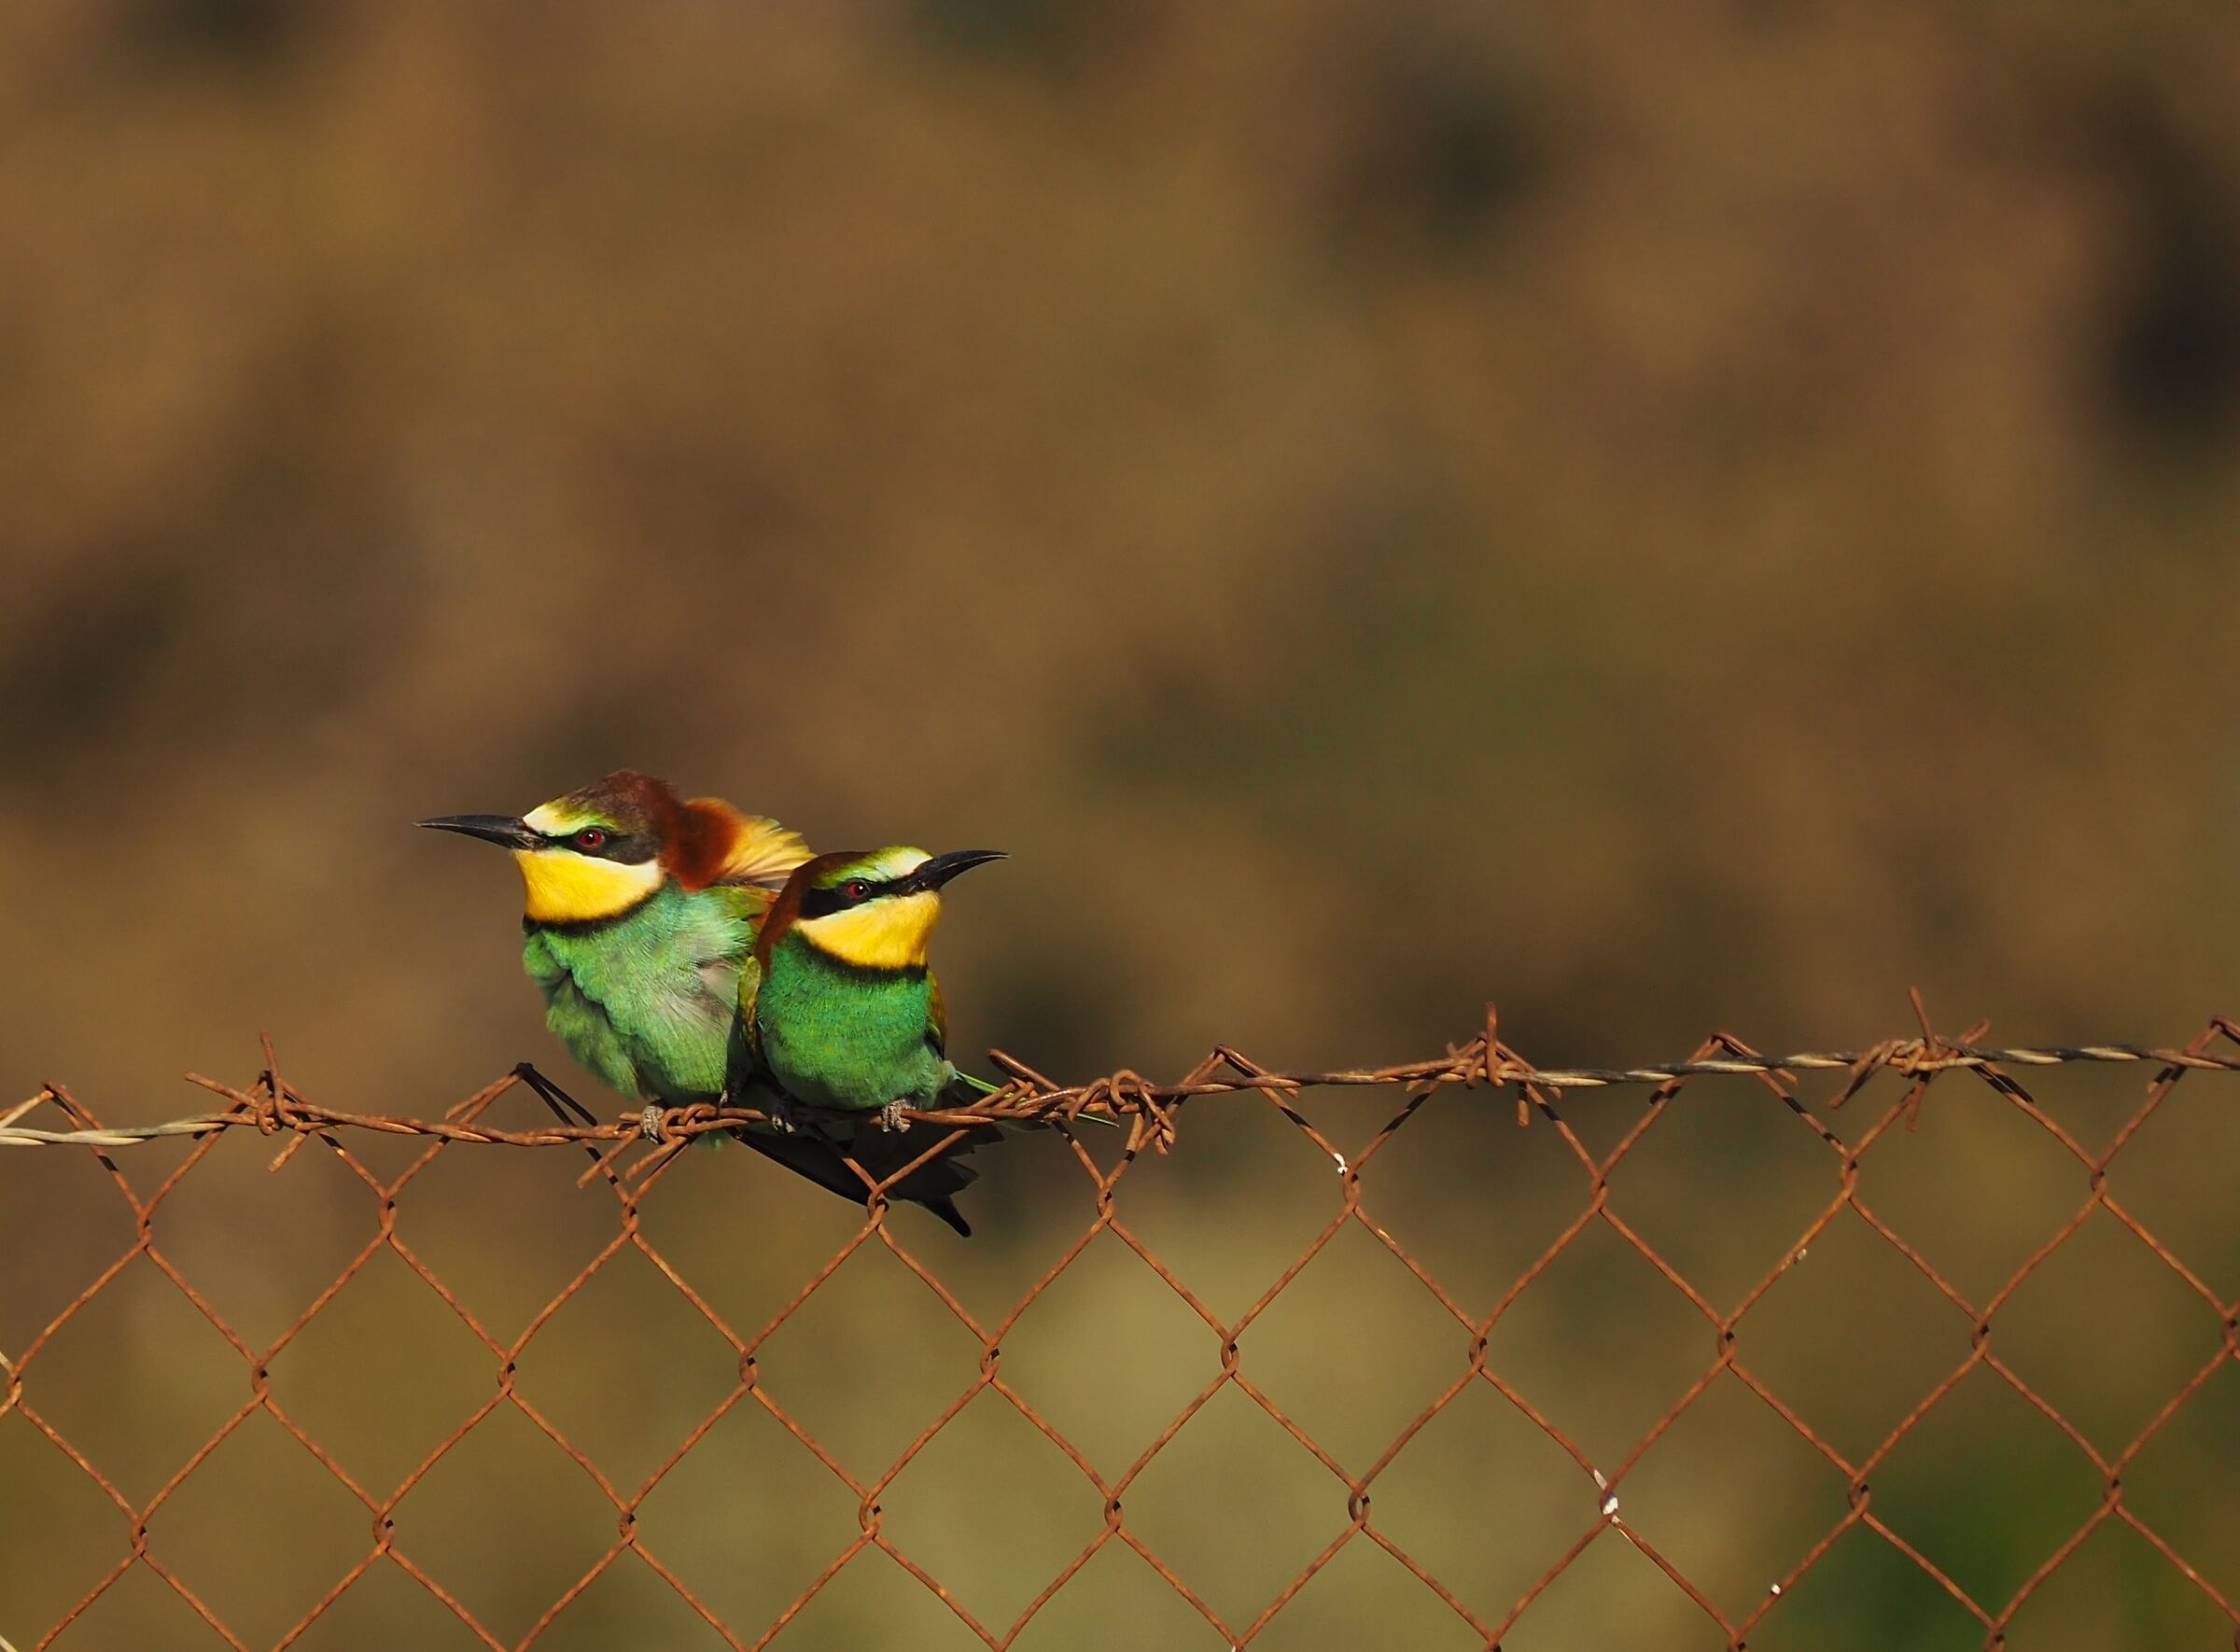 The Bee-eaters are back...